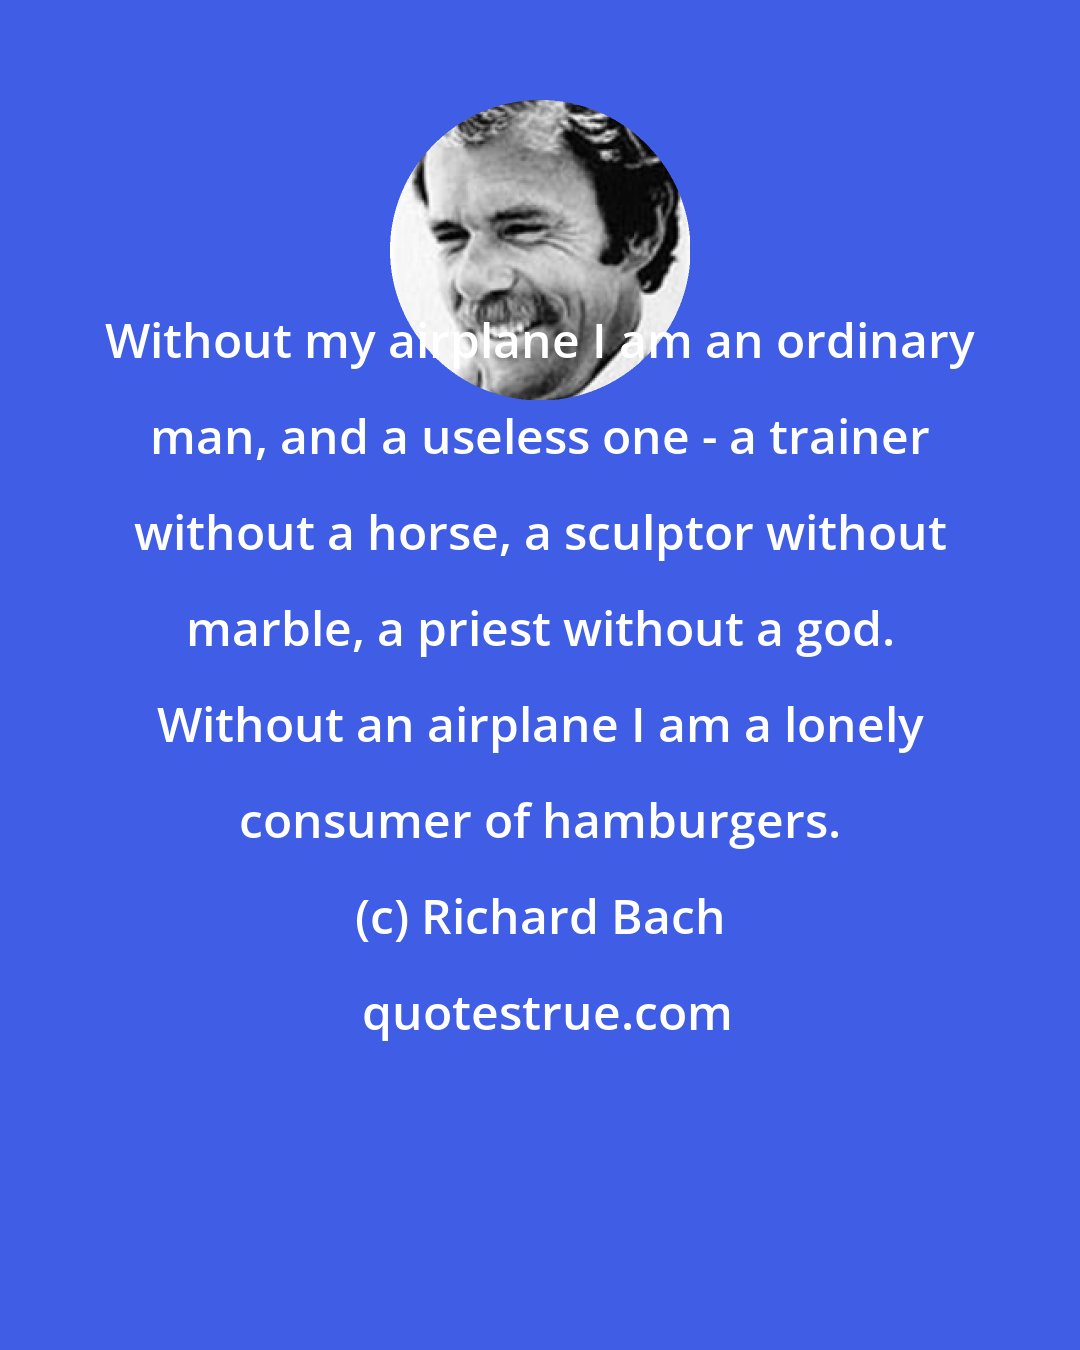 Richard Bach: Without my airplane I am an ordinary man, and a useless one - a trainer without a horse, a sculptor without marble, a priest without a god. Without an airplane I am a lonely consumer of hamburgers.